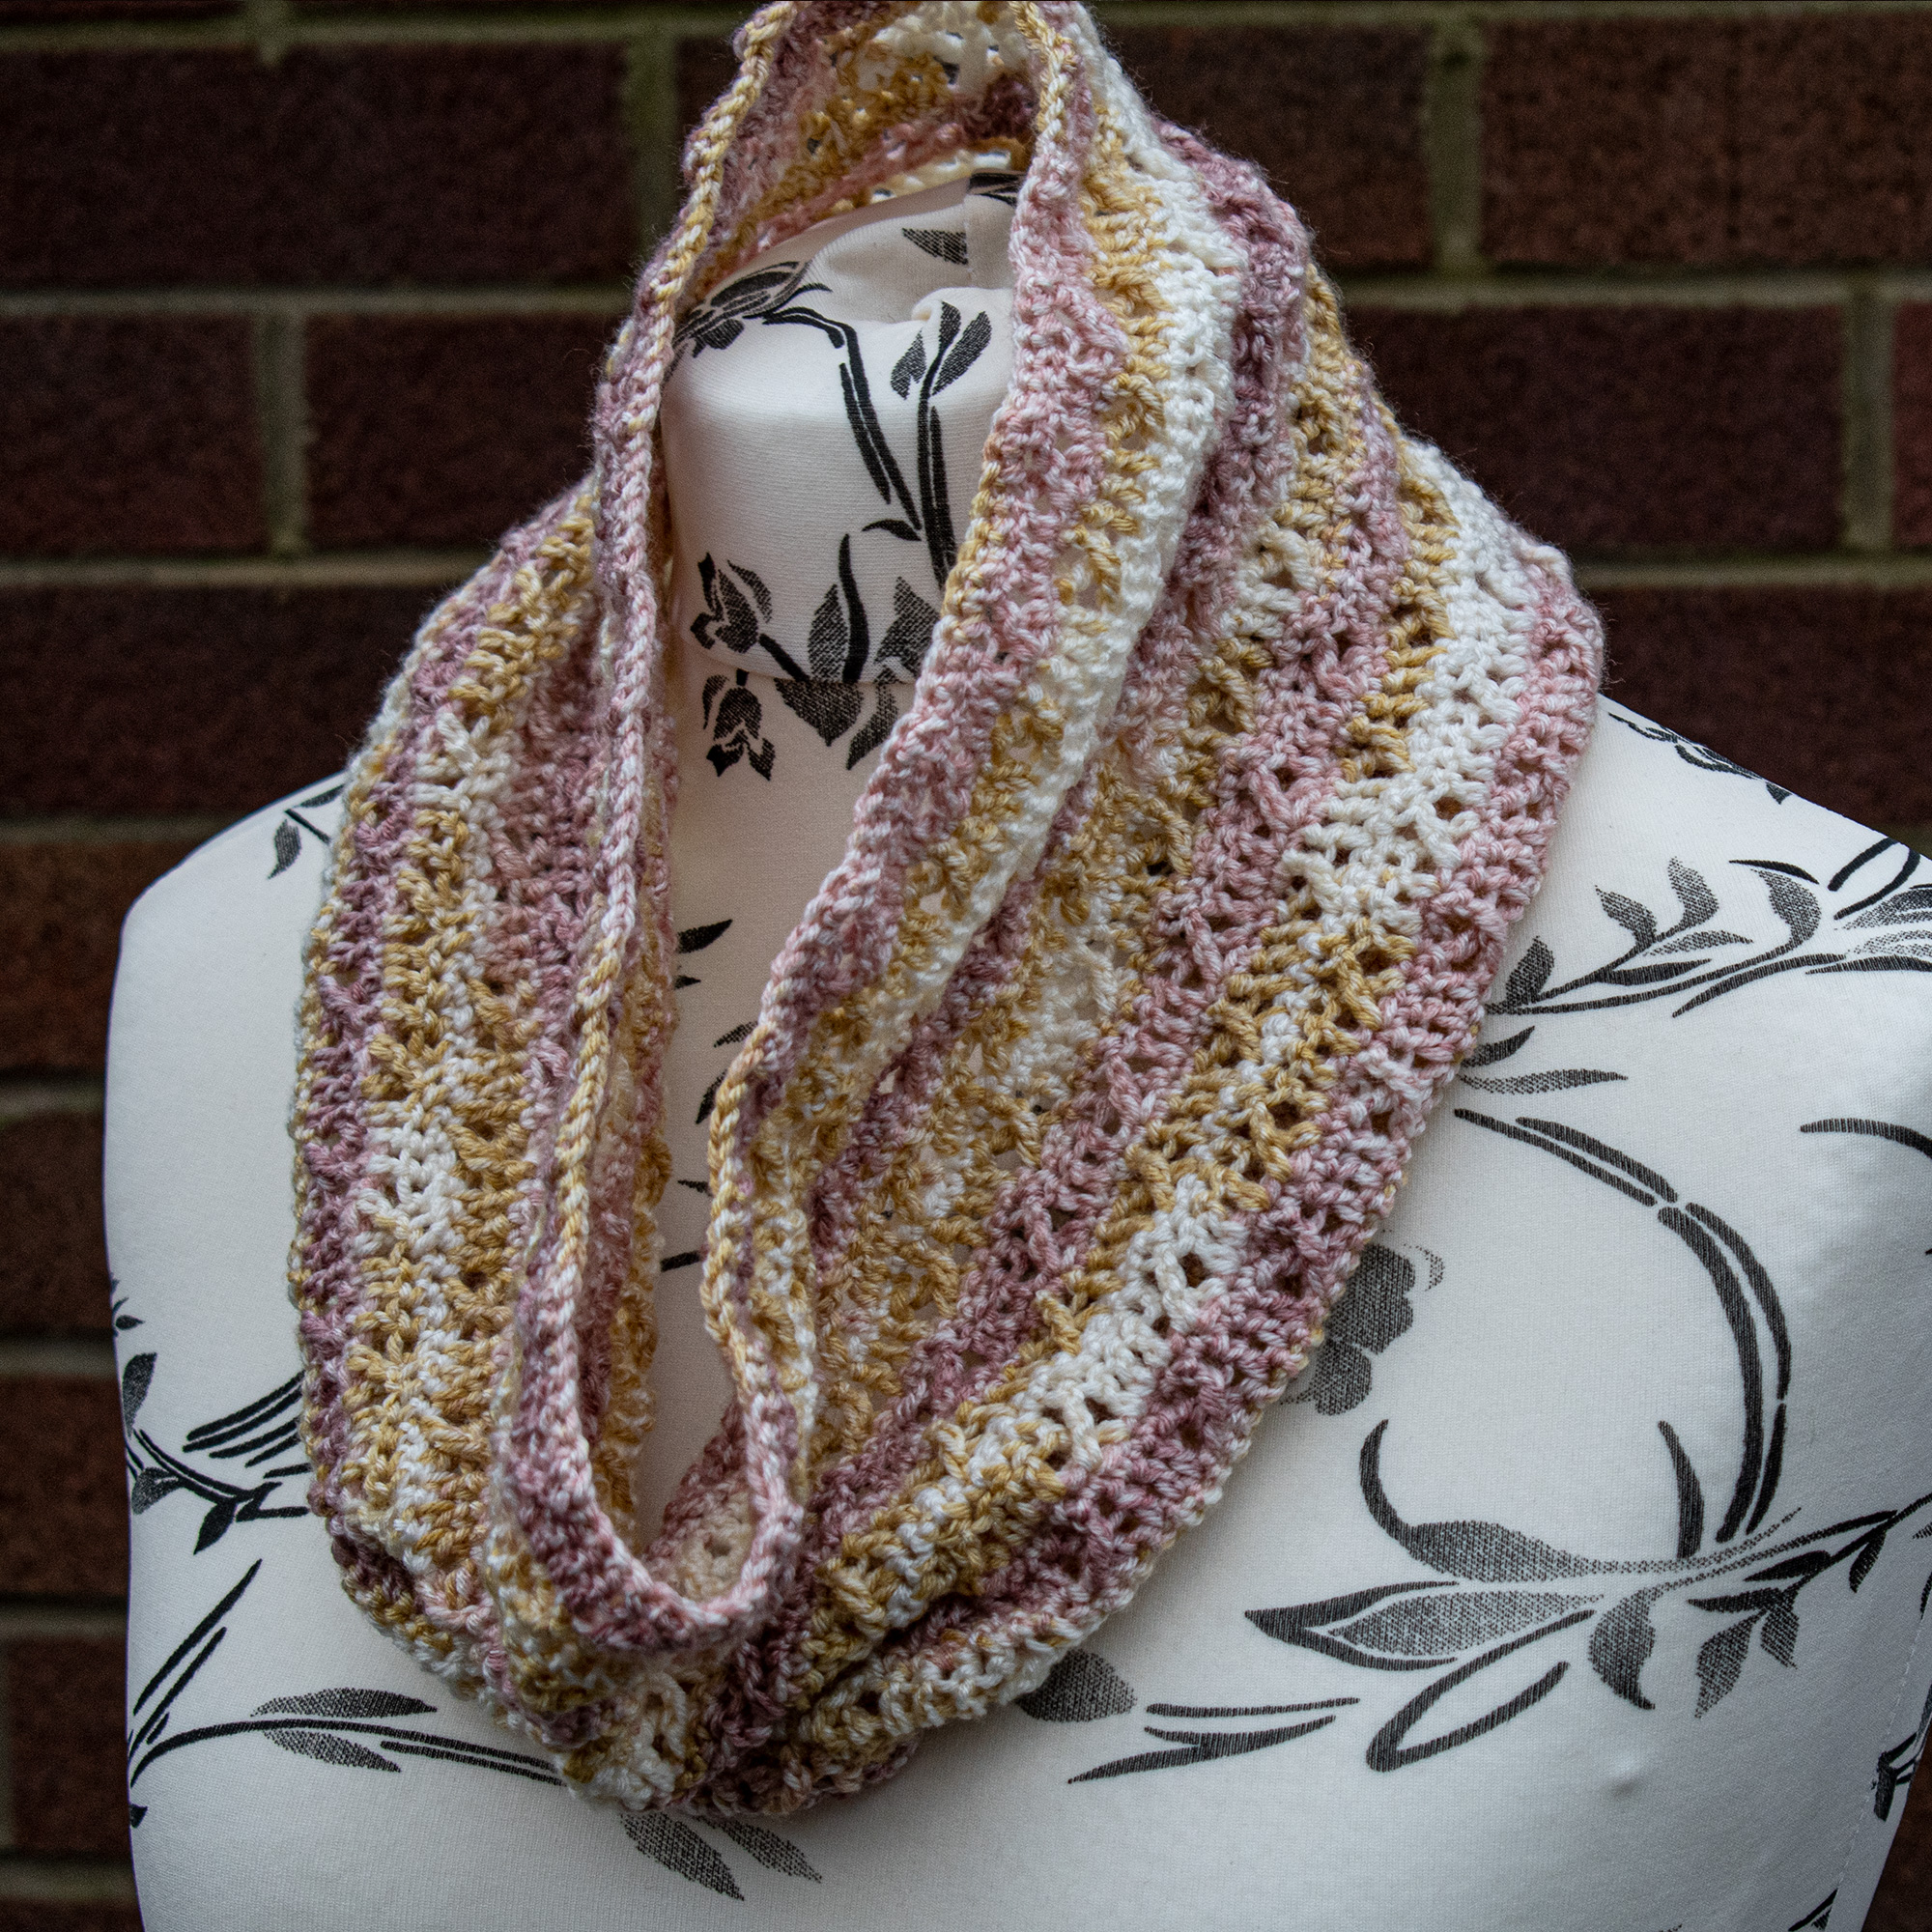 this crochet cowl has a gorgeous drape and beautifully subtle texture